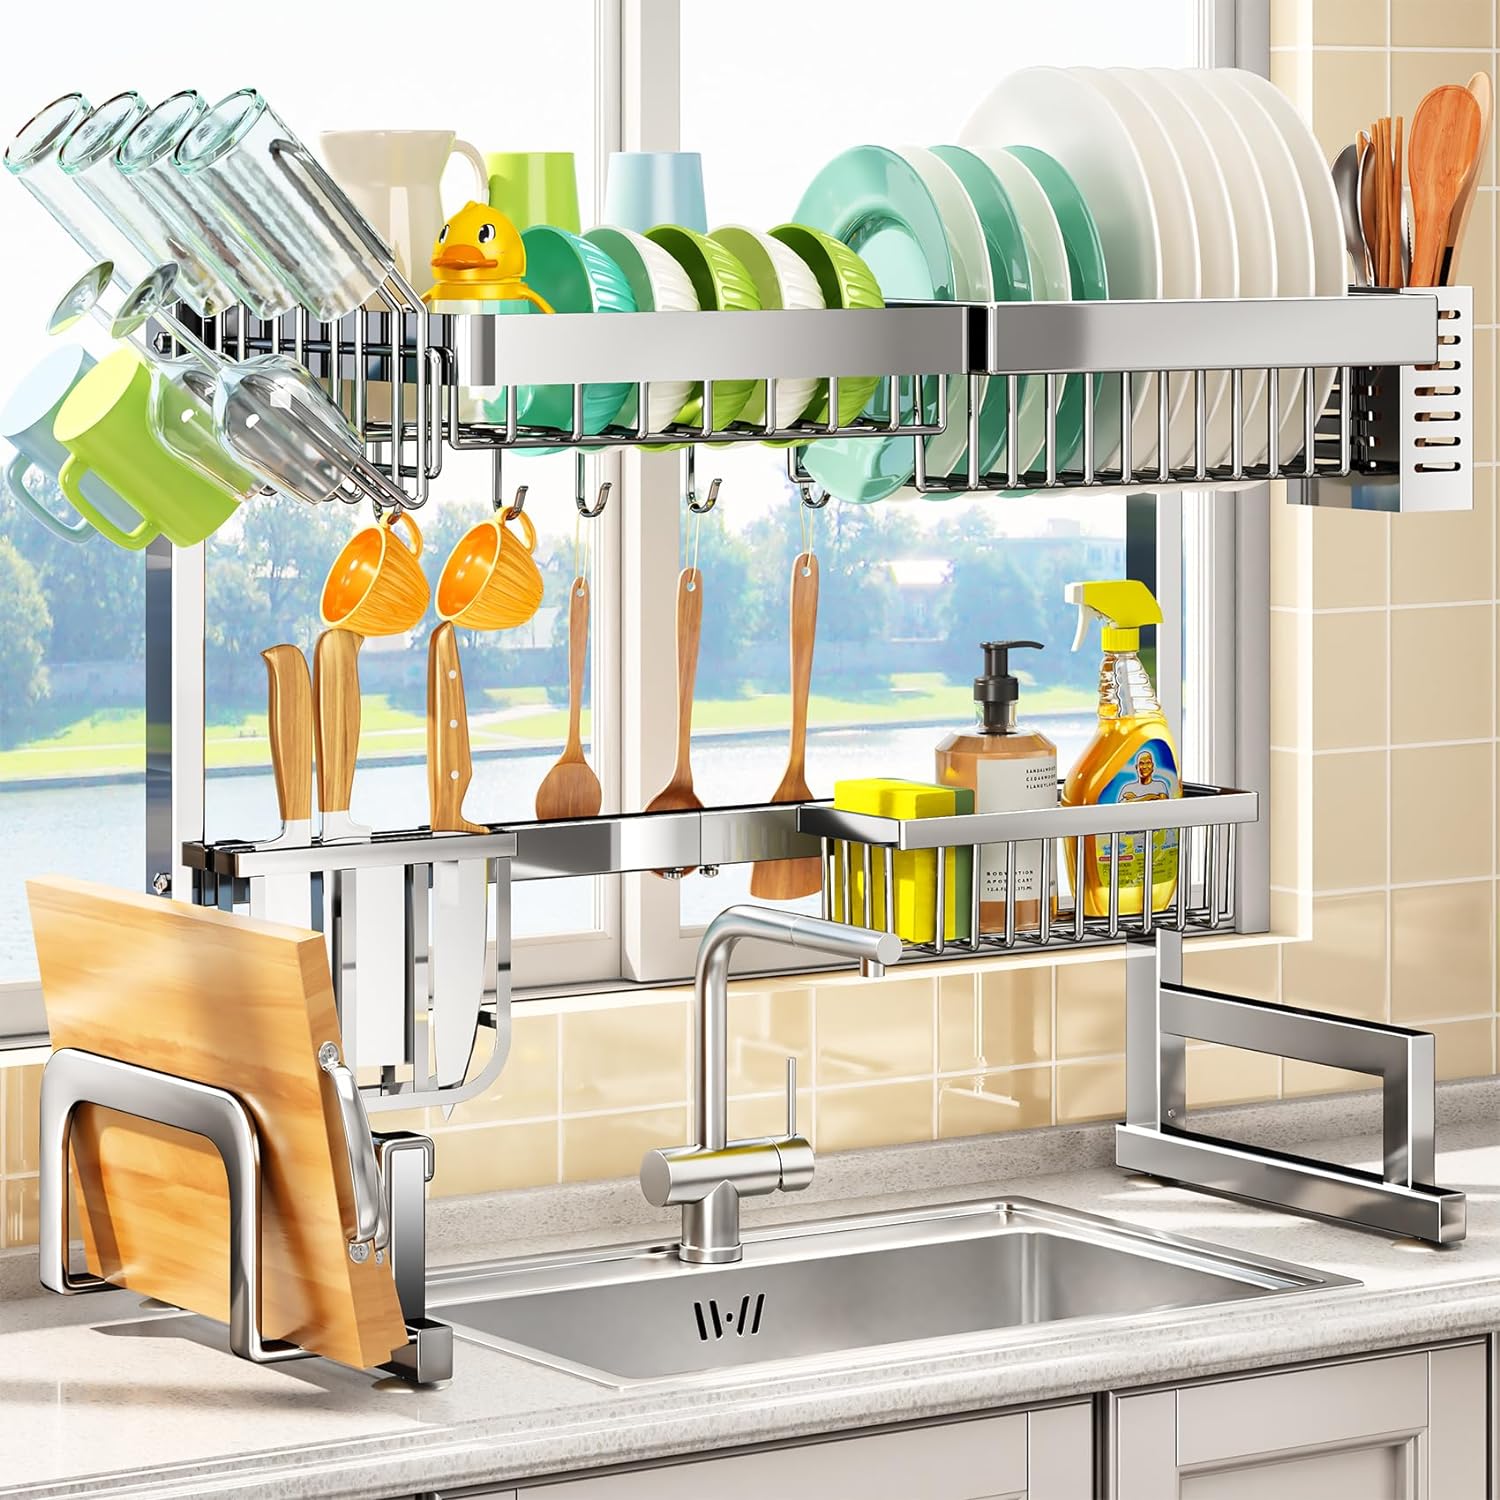 https://bigbigmart.com/wp-content/uploads/2023/10/Over-The-Sink-Dish-Drying-Rack-Full-Stainless-Steel-Adjustable-26.8-to-34.6-Large-Dish-Drying-Rack-for-Kitchen-Counter-with-Multiple-Baskets-Utensil-Sponge-Holder-Sink-Caddy-2-Tier-Silver7.jpg